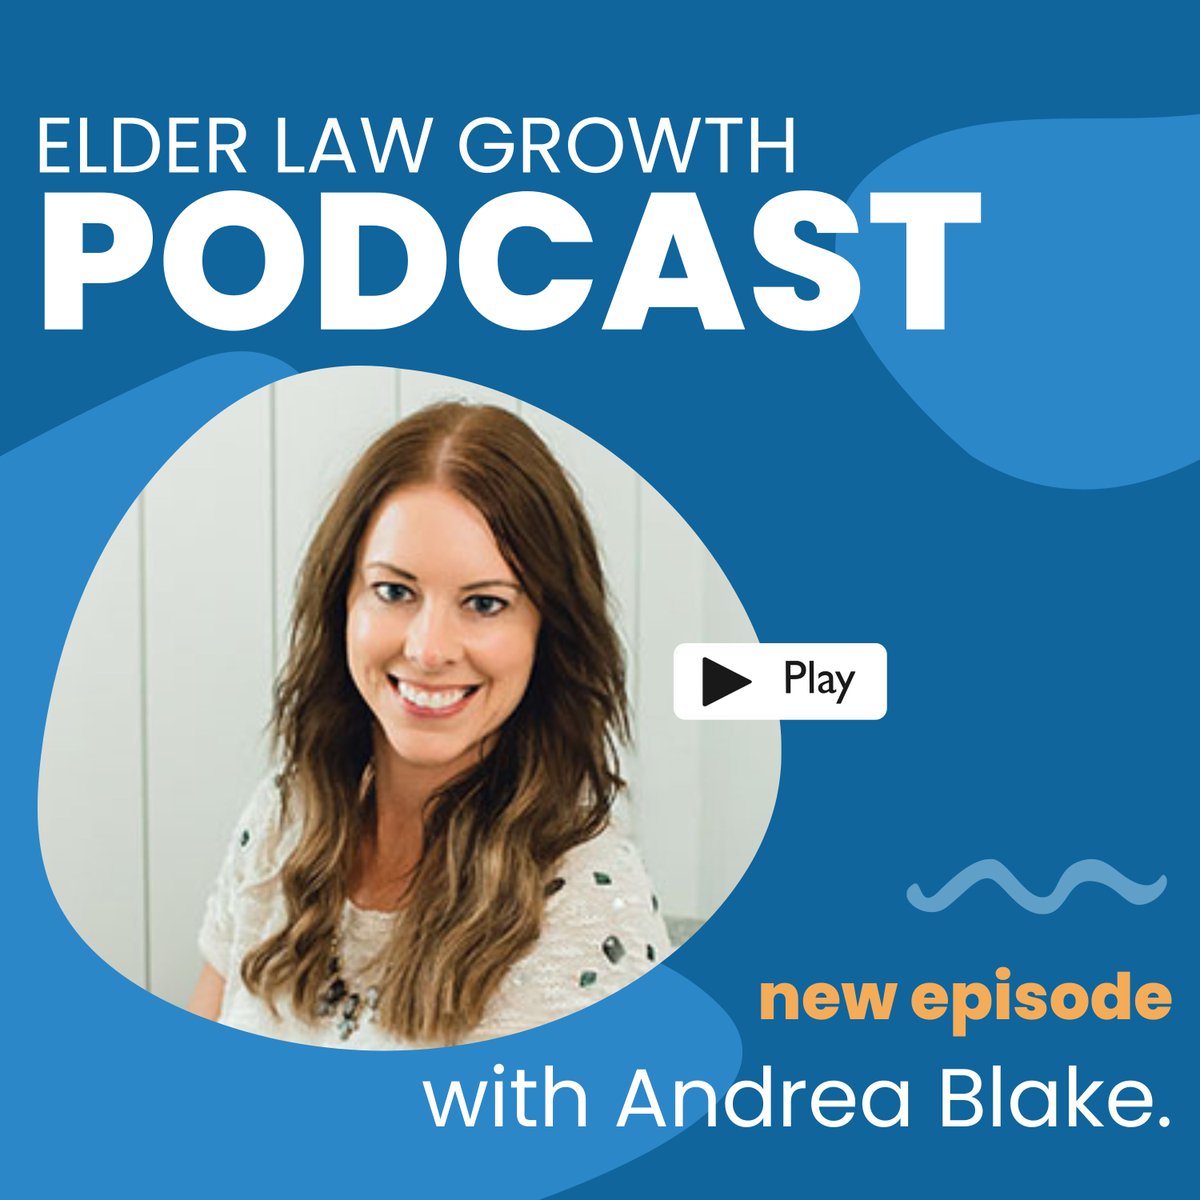 Our newest podcast episode uncovers practical yet effective strategies to use ChatGPT in your Elder Law or Estate Planning Practice. 🎙️ 𝗟𝗜𝗡𝗞 𝗜𝗡 𝗕𝗜𝗢

#Bambiz #ElderLaw #EstatePlanning #Lawyer #Attorney #AttorneyMarketing #LawyerMarketing #LegalMarketing #ChatGPT #AI #Law